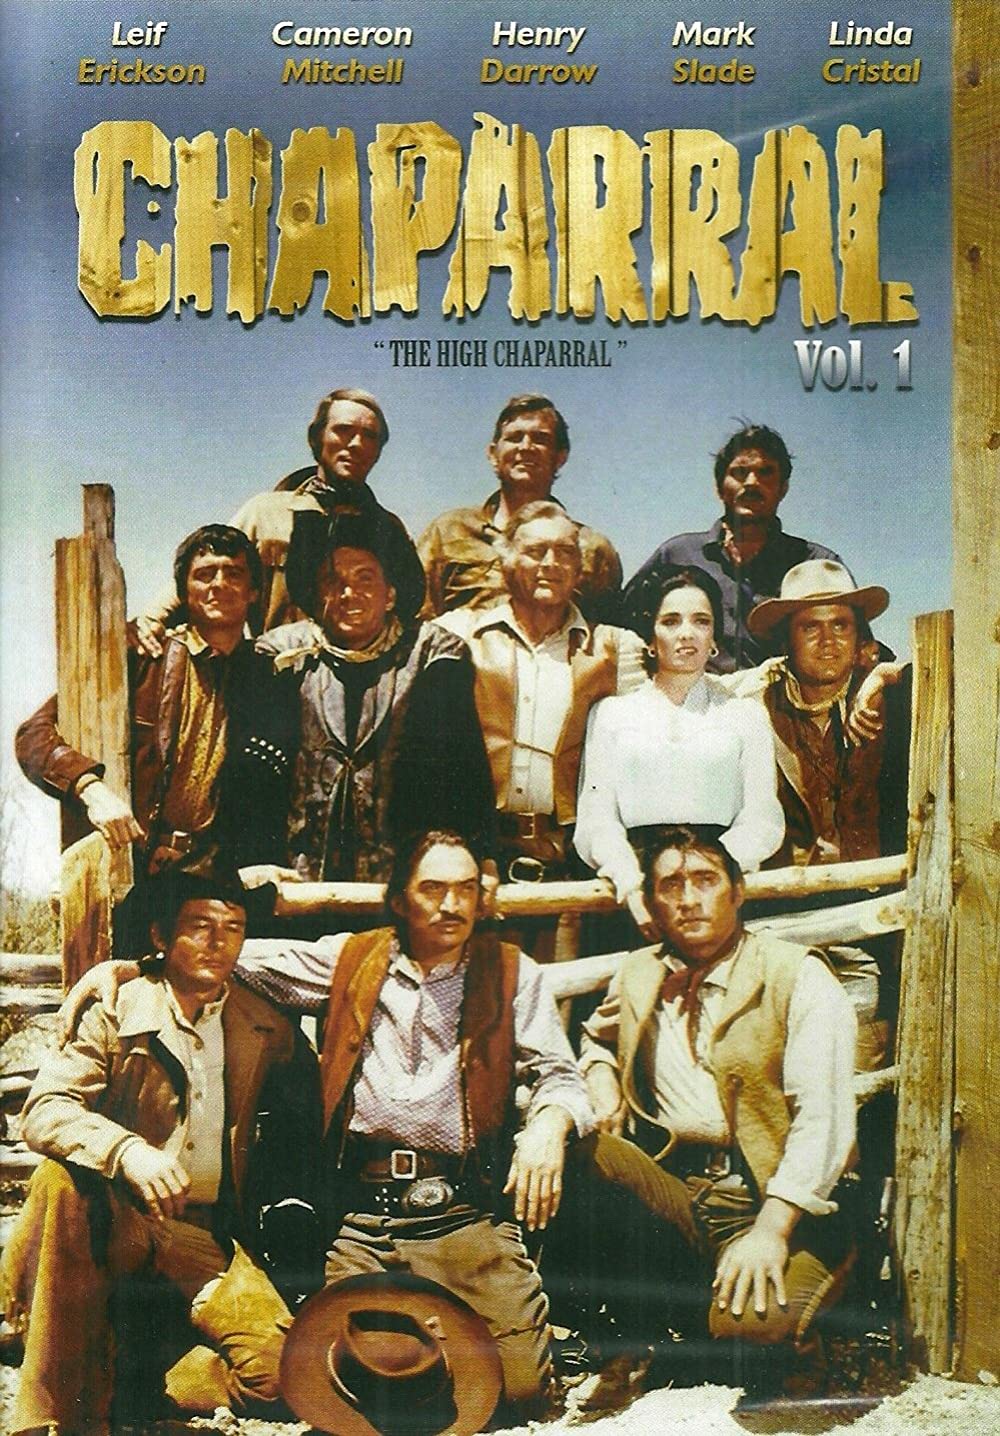 "High Chaparral USA 1967–1971 (The High Chaparral) US Westernserie 1967- in HD remastered-16:9, 1280x 720 Px. x 50 FPS.-1.Staffel."